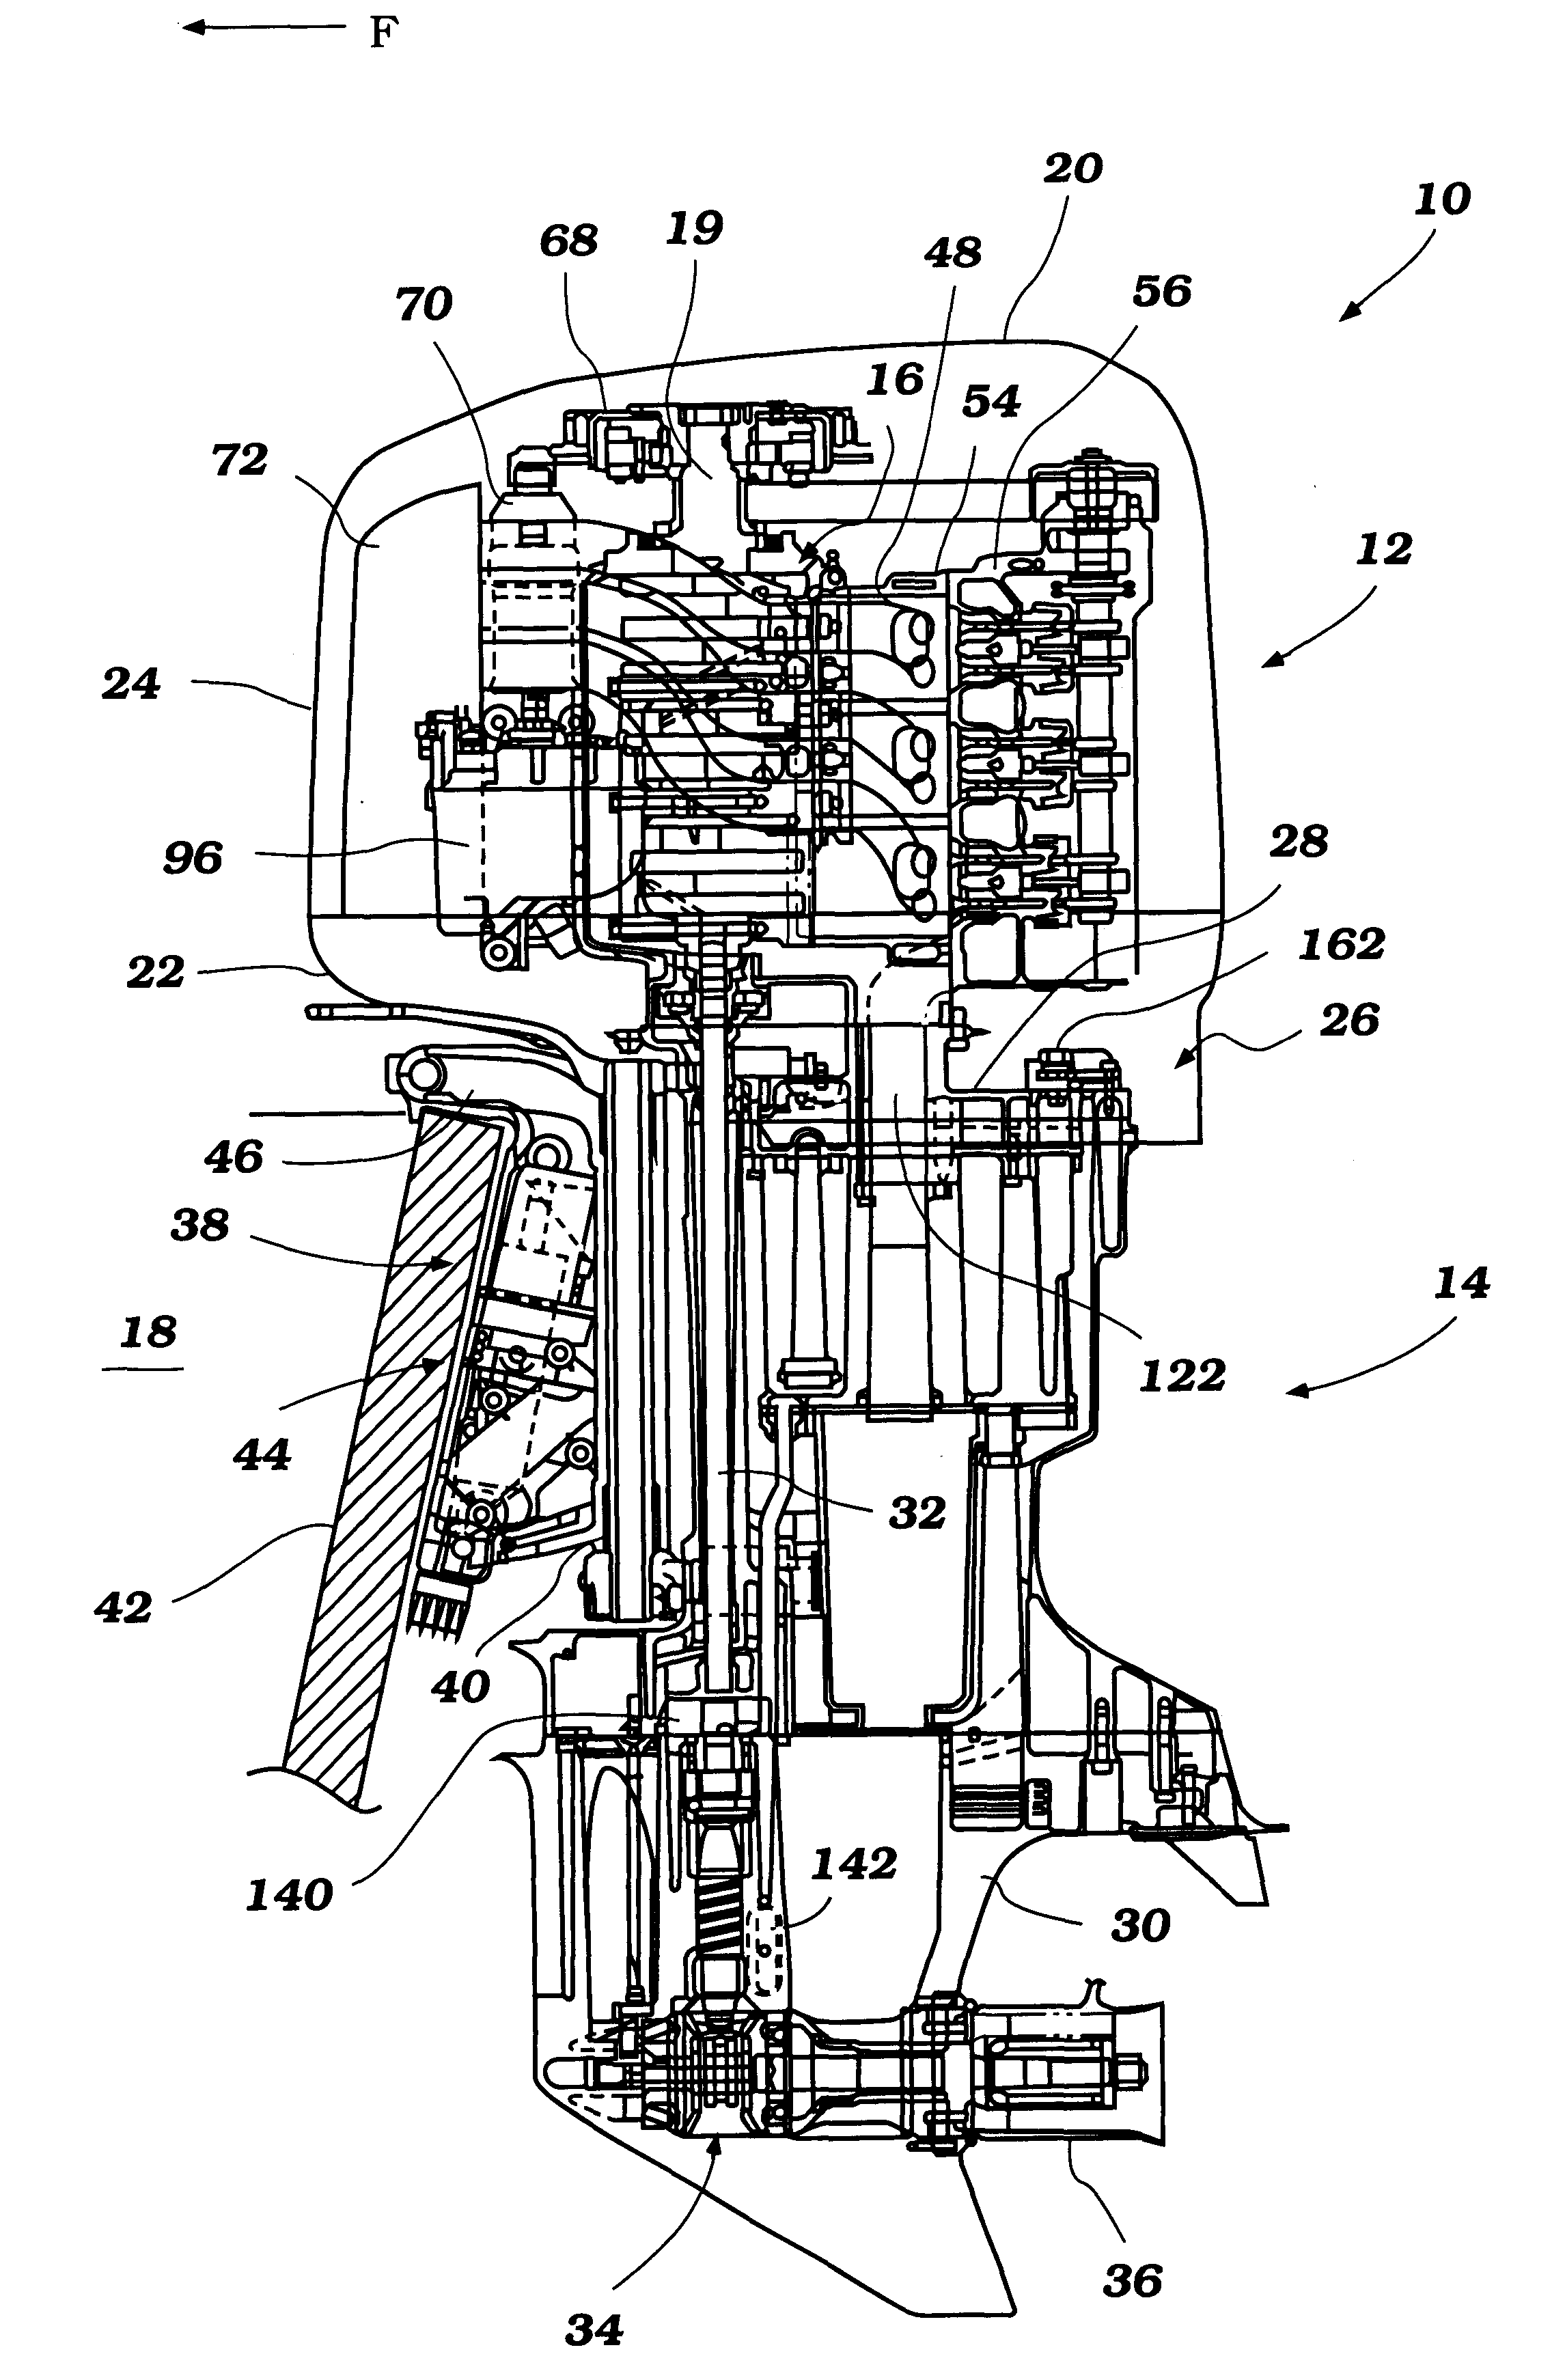 Outboard motor cooling and exhaust system